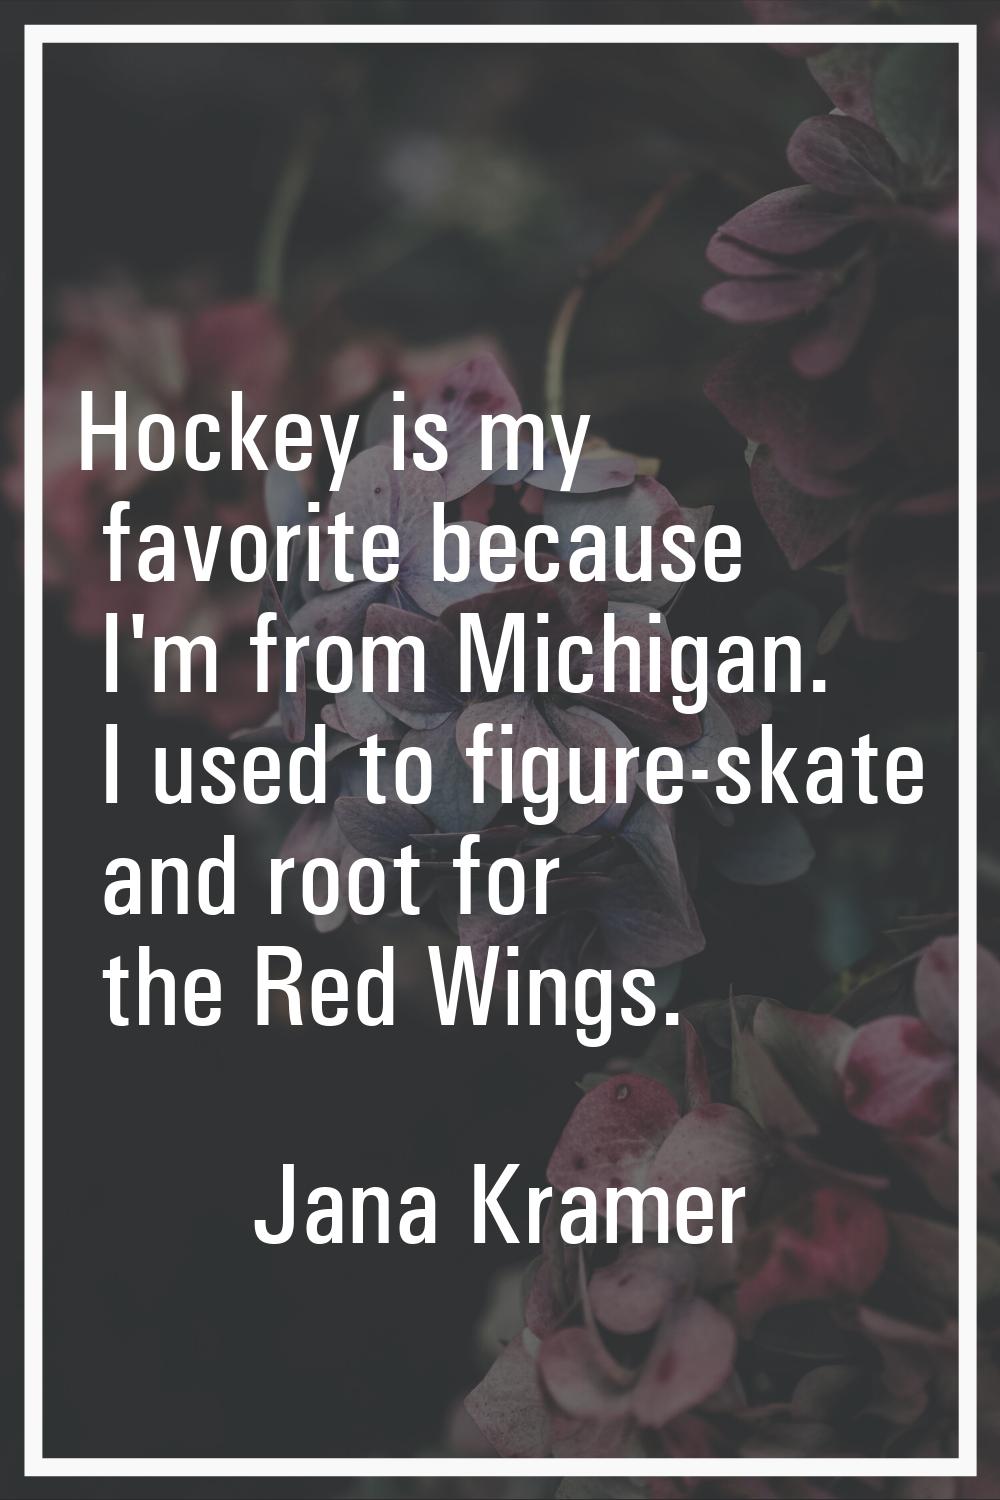 Hockey is my favorite because I'm from Michigan. I used to figure-skate and root for the Red Wings.